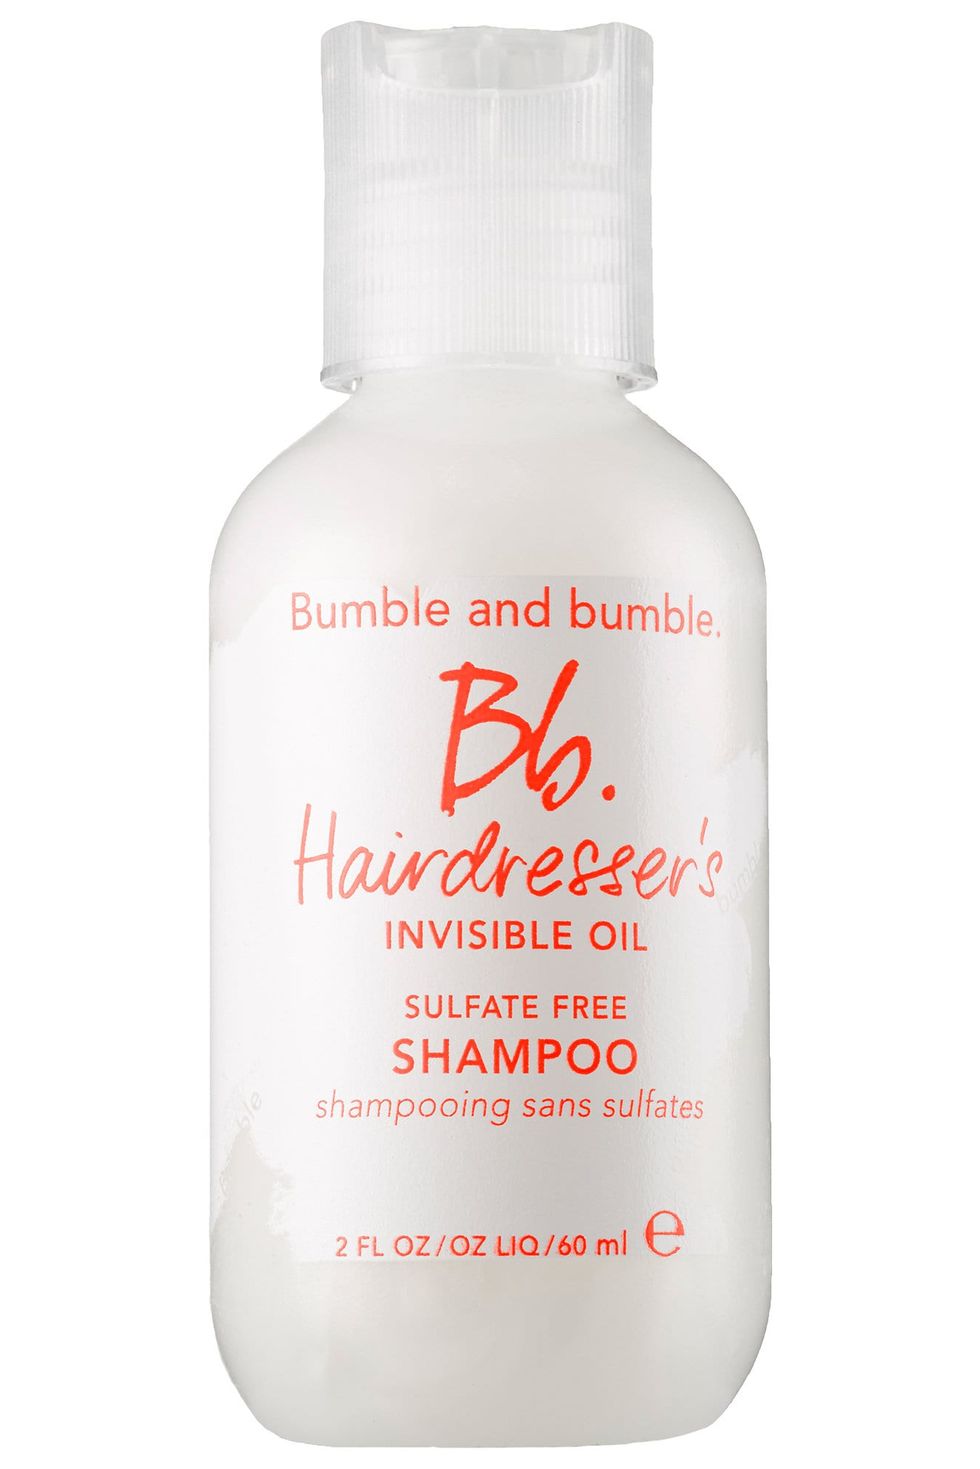 Hairdresser’s Invisible Oil Shampoo